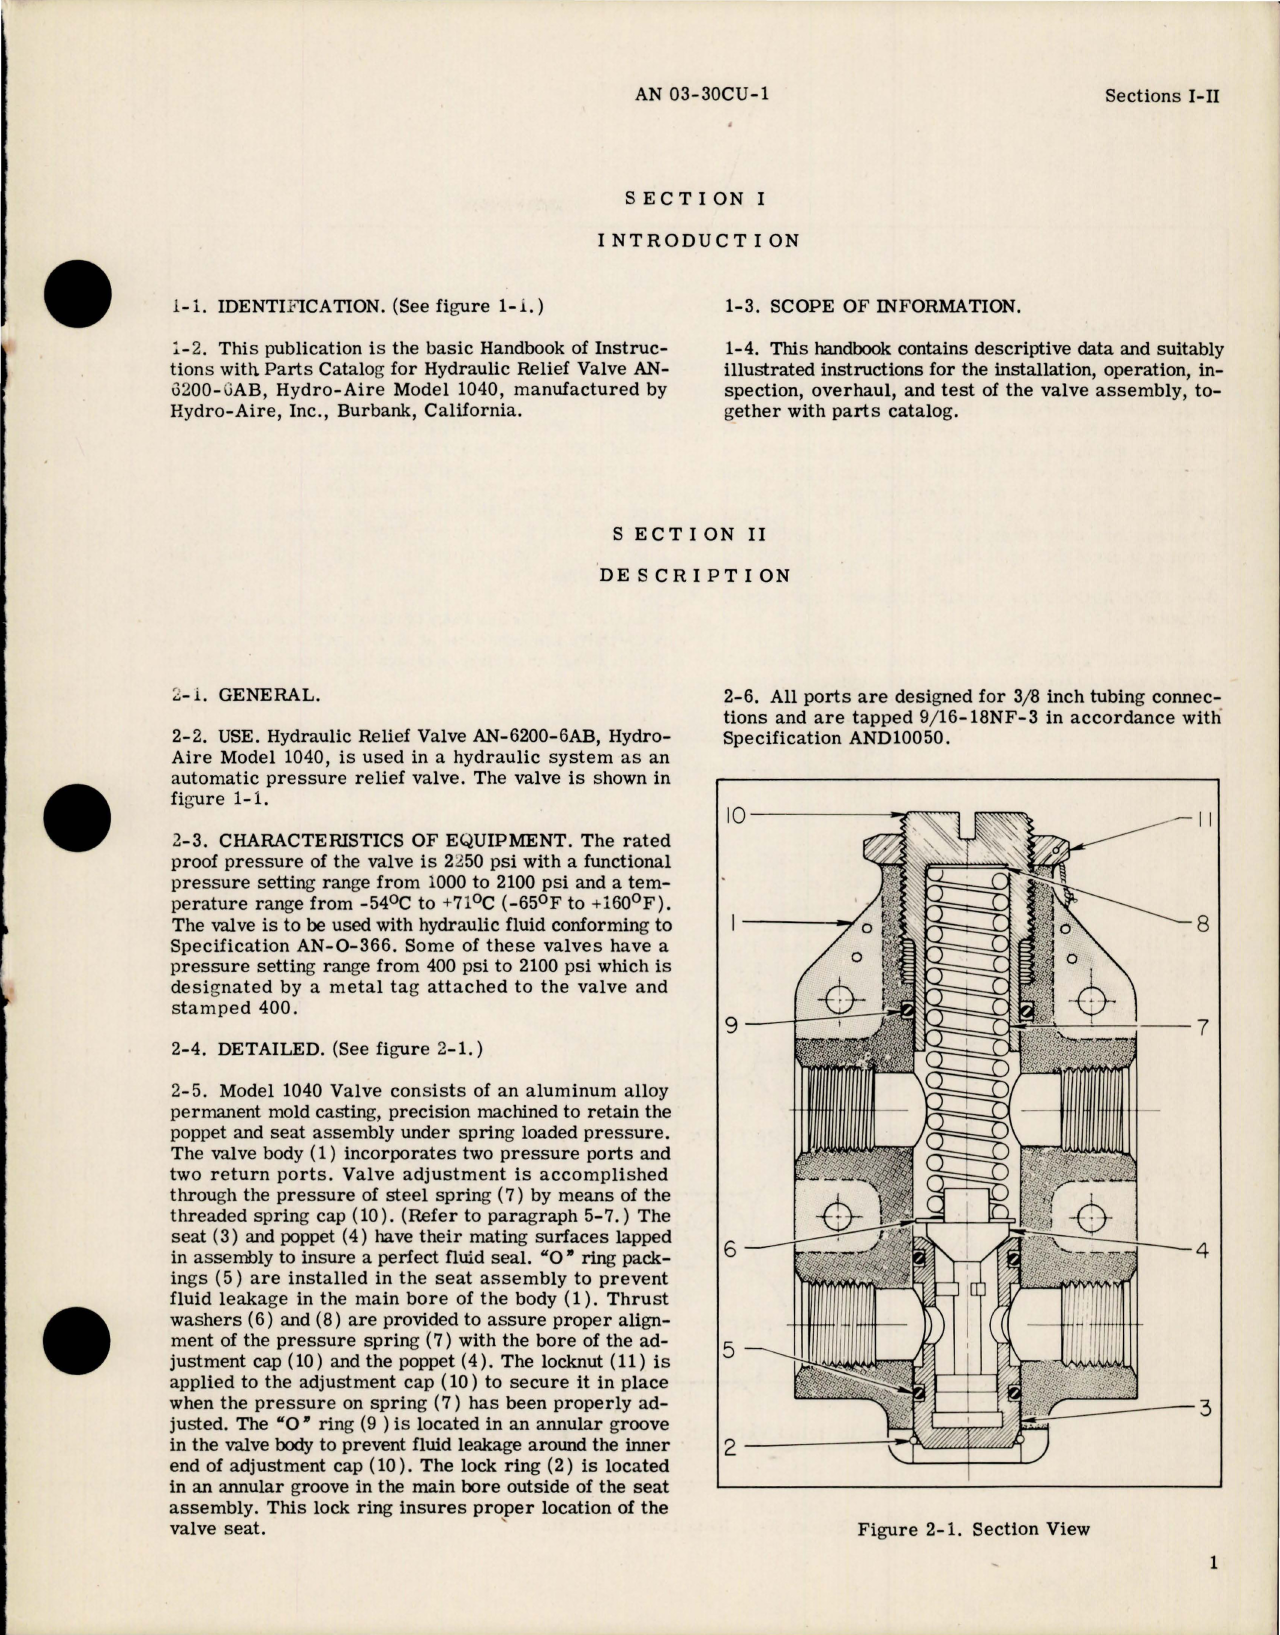 Sample page 5 from AirCorps Library document: Operation, Service, Overhaul Instructions w Parts for Hydraulic Relief Valve - Parts 6200-6AB and 1040